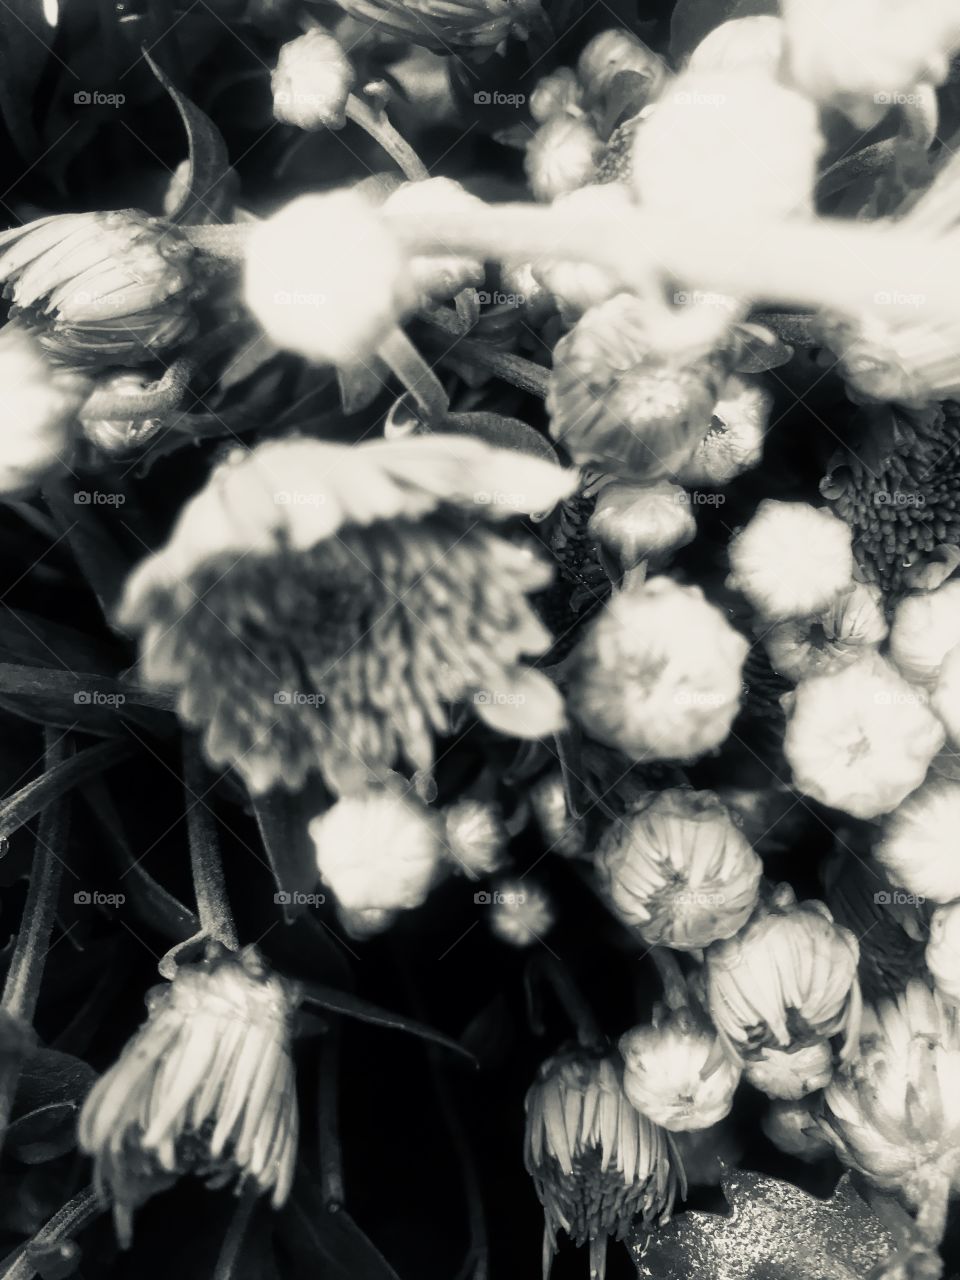 People, Monochrome, Many, Flower, No Person